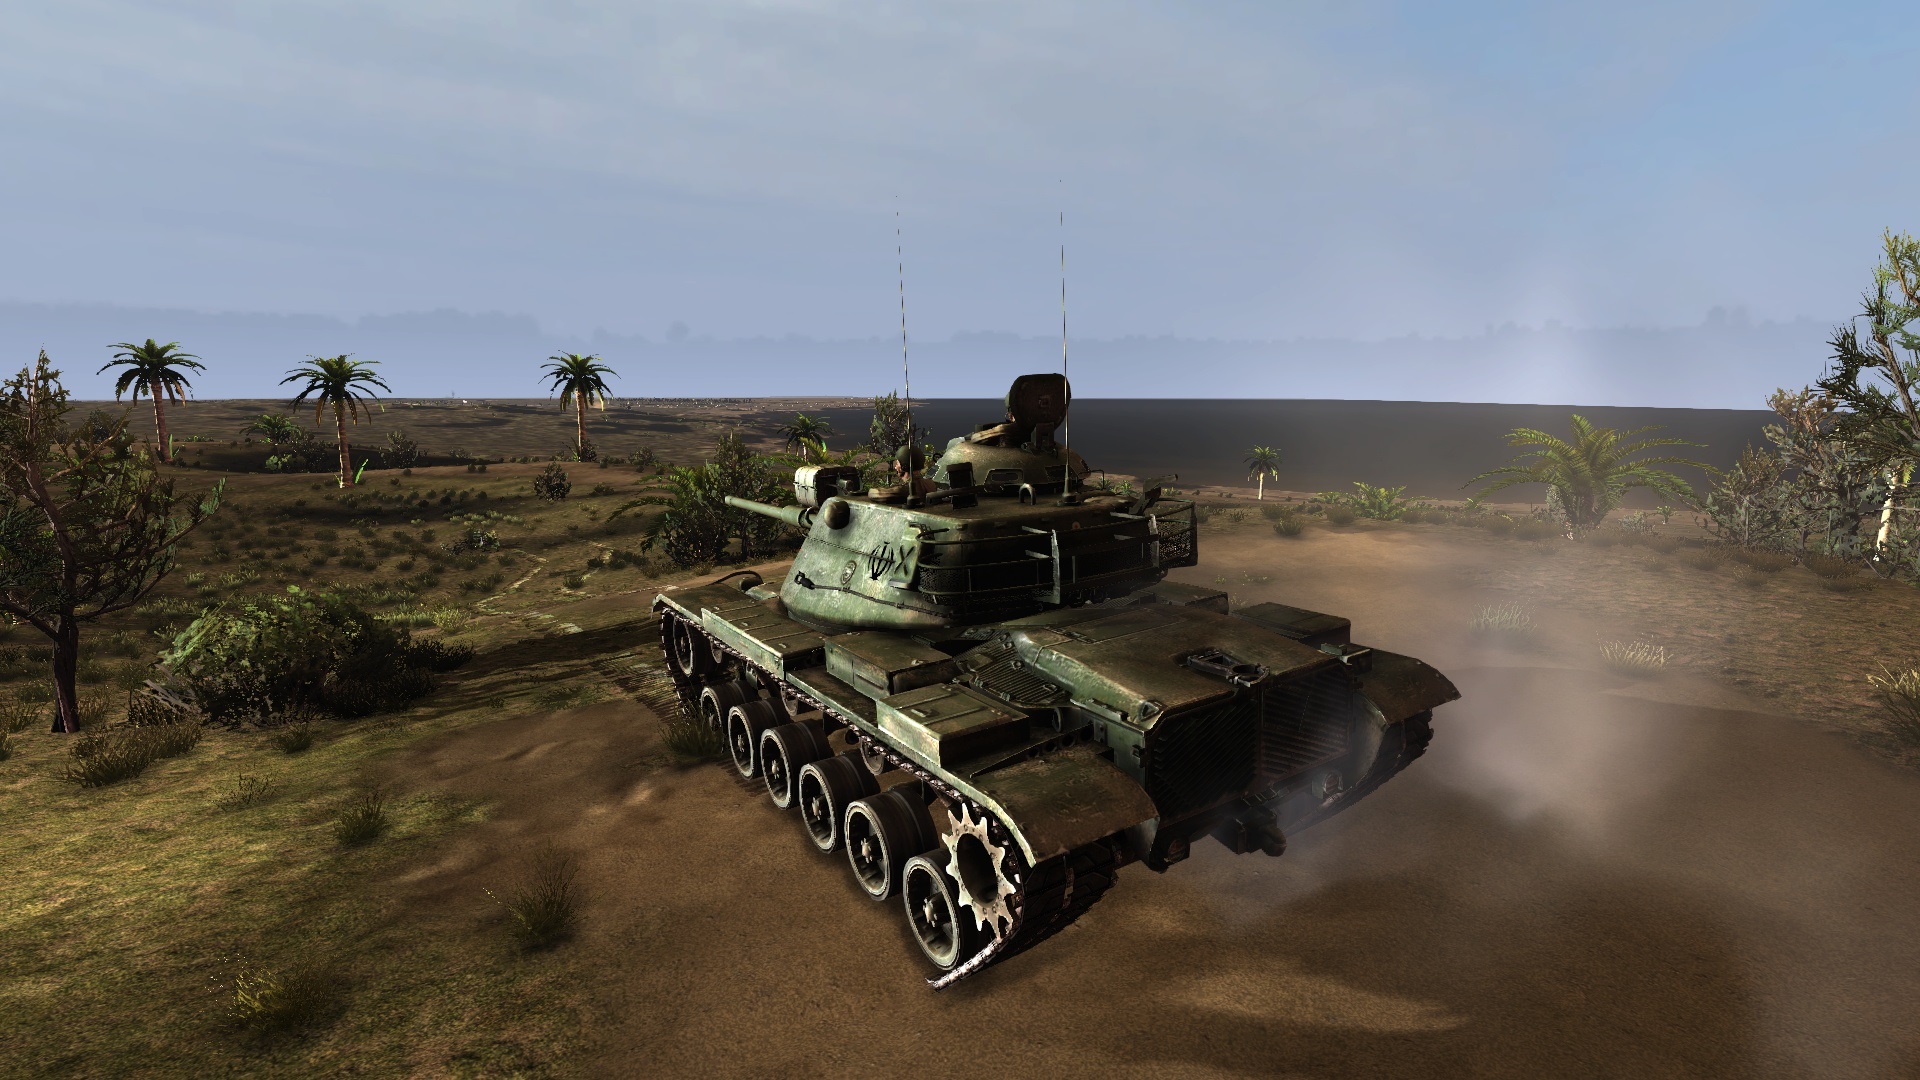 Bes tank games: Steel Armor Blaze of War. Image shows a tank relaxing on a tropical island.